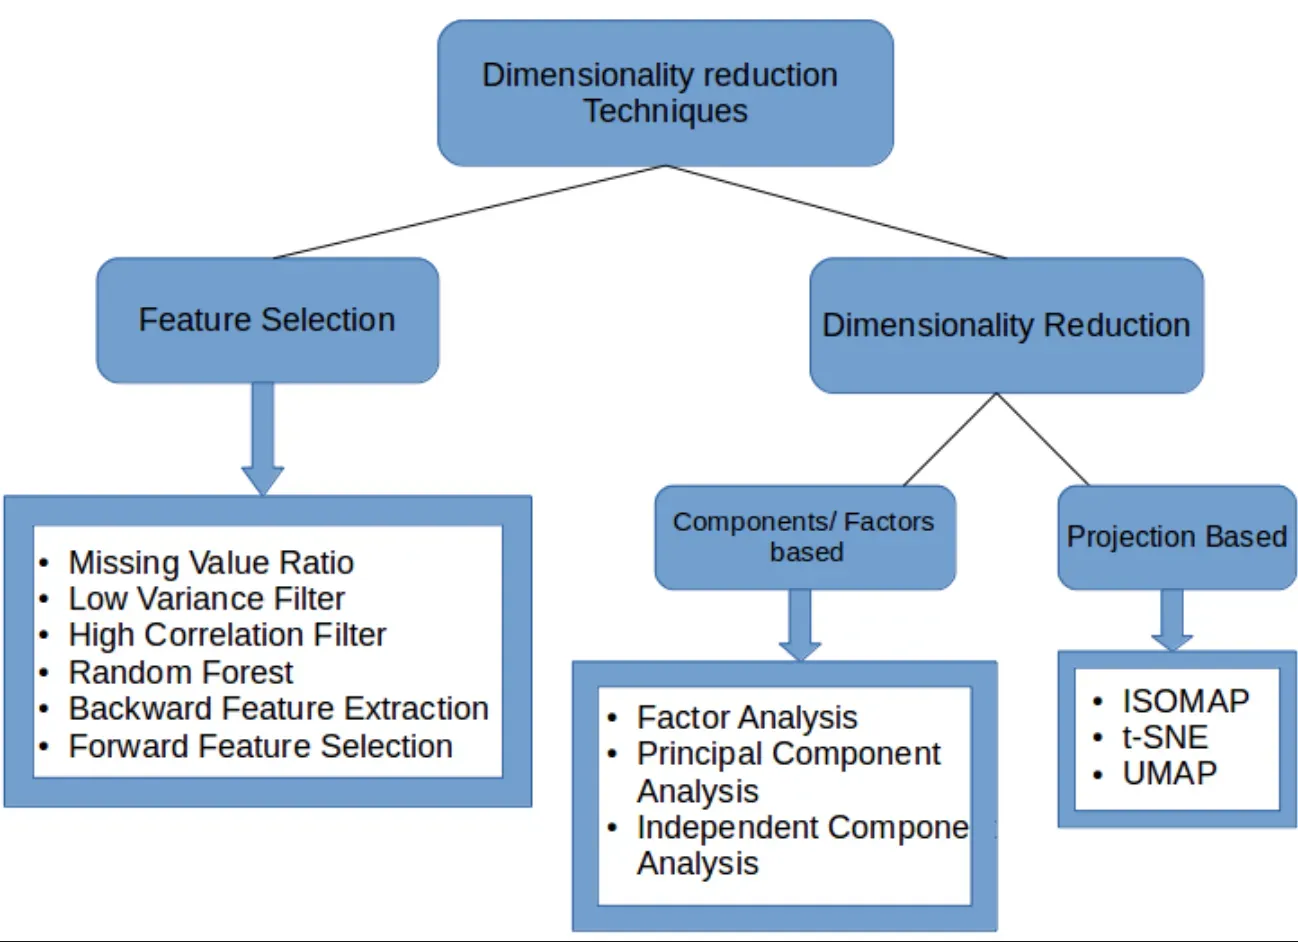 Best Practices in Dimensionality Reduction